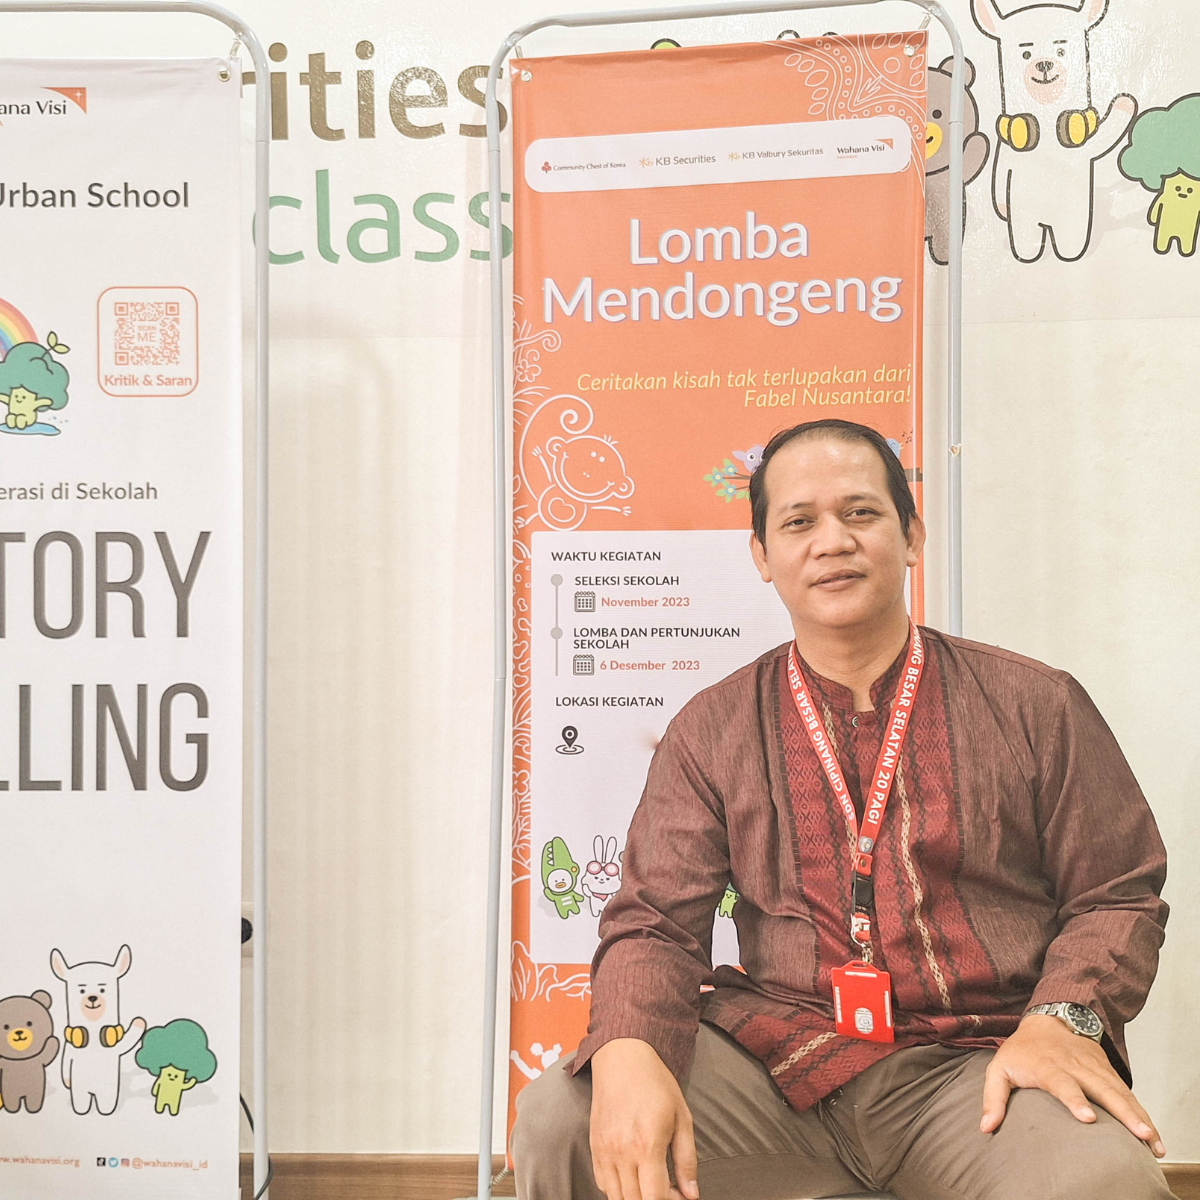 Embarking on a Literacy Adventure: Storytelling Transforms Teachers and Children in Schools